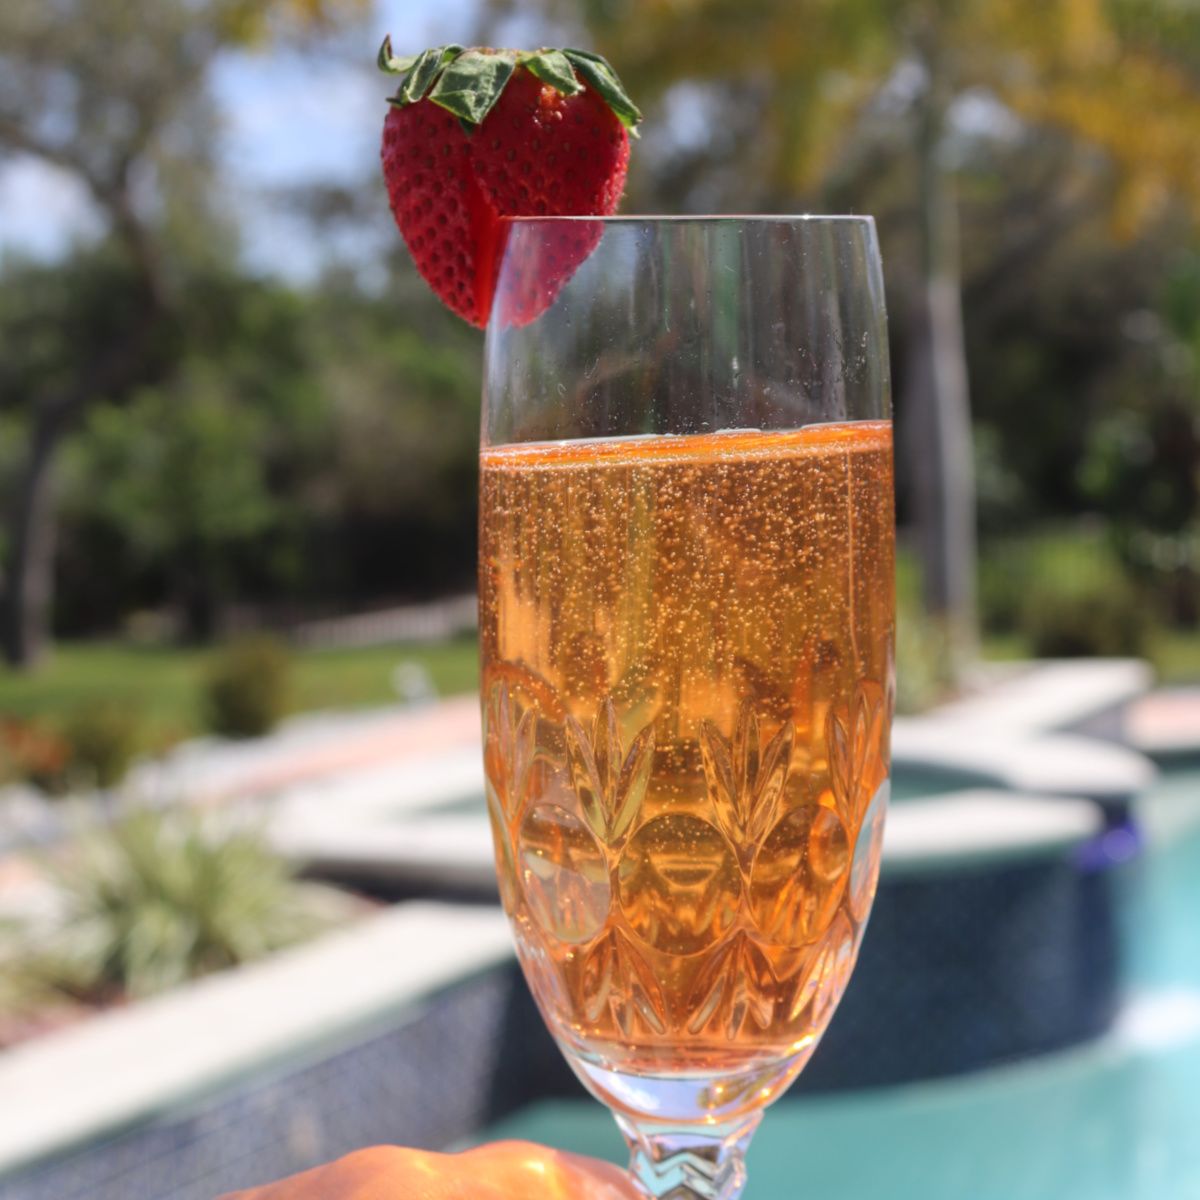 Strawberry Bellini Recipe - Perfect for Any Special Occasion